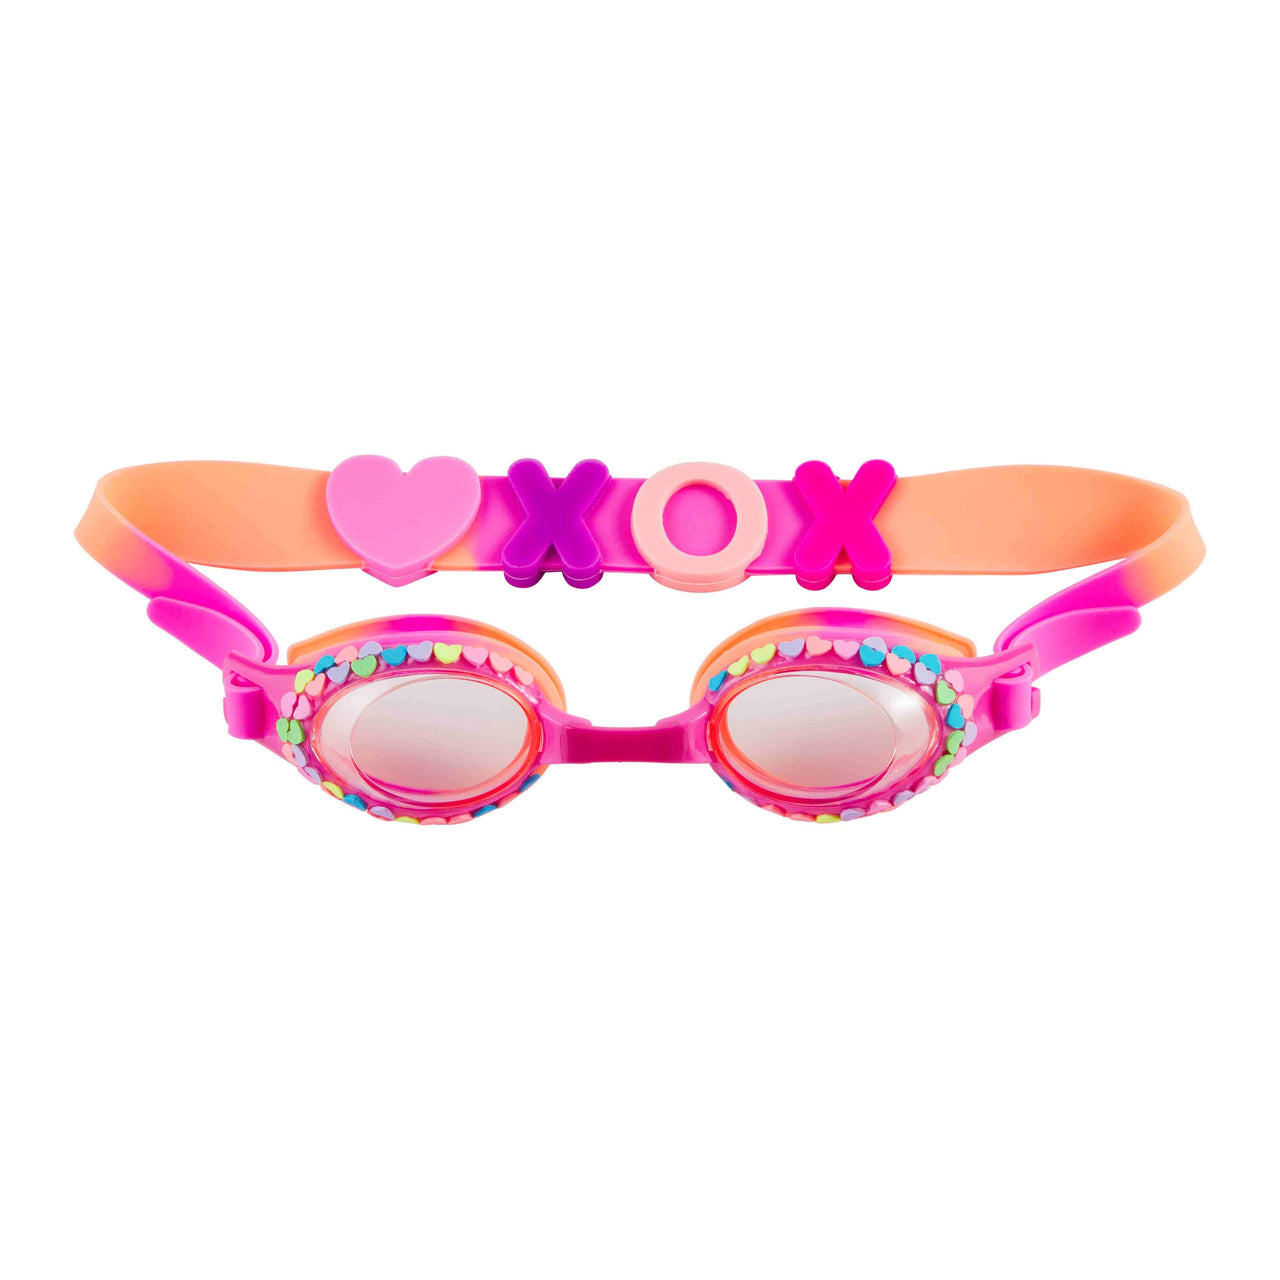 GIRL'S CANDY HEART GOGGLES